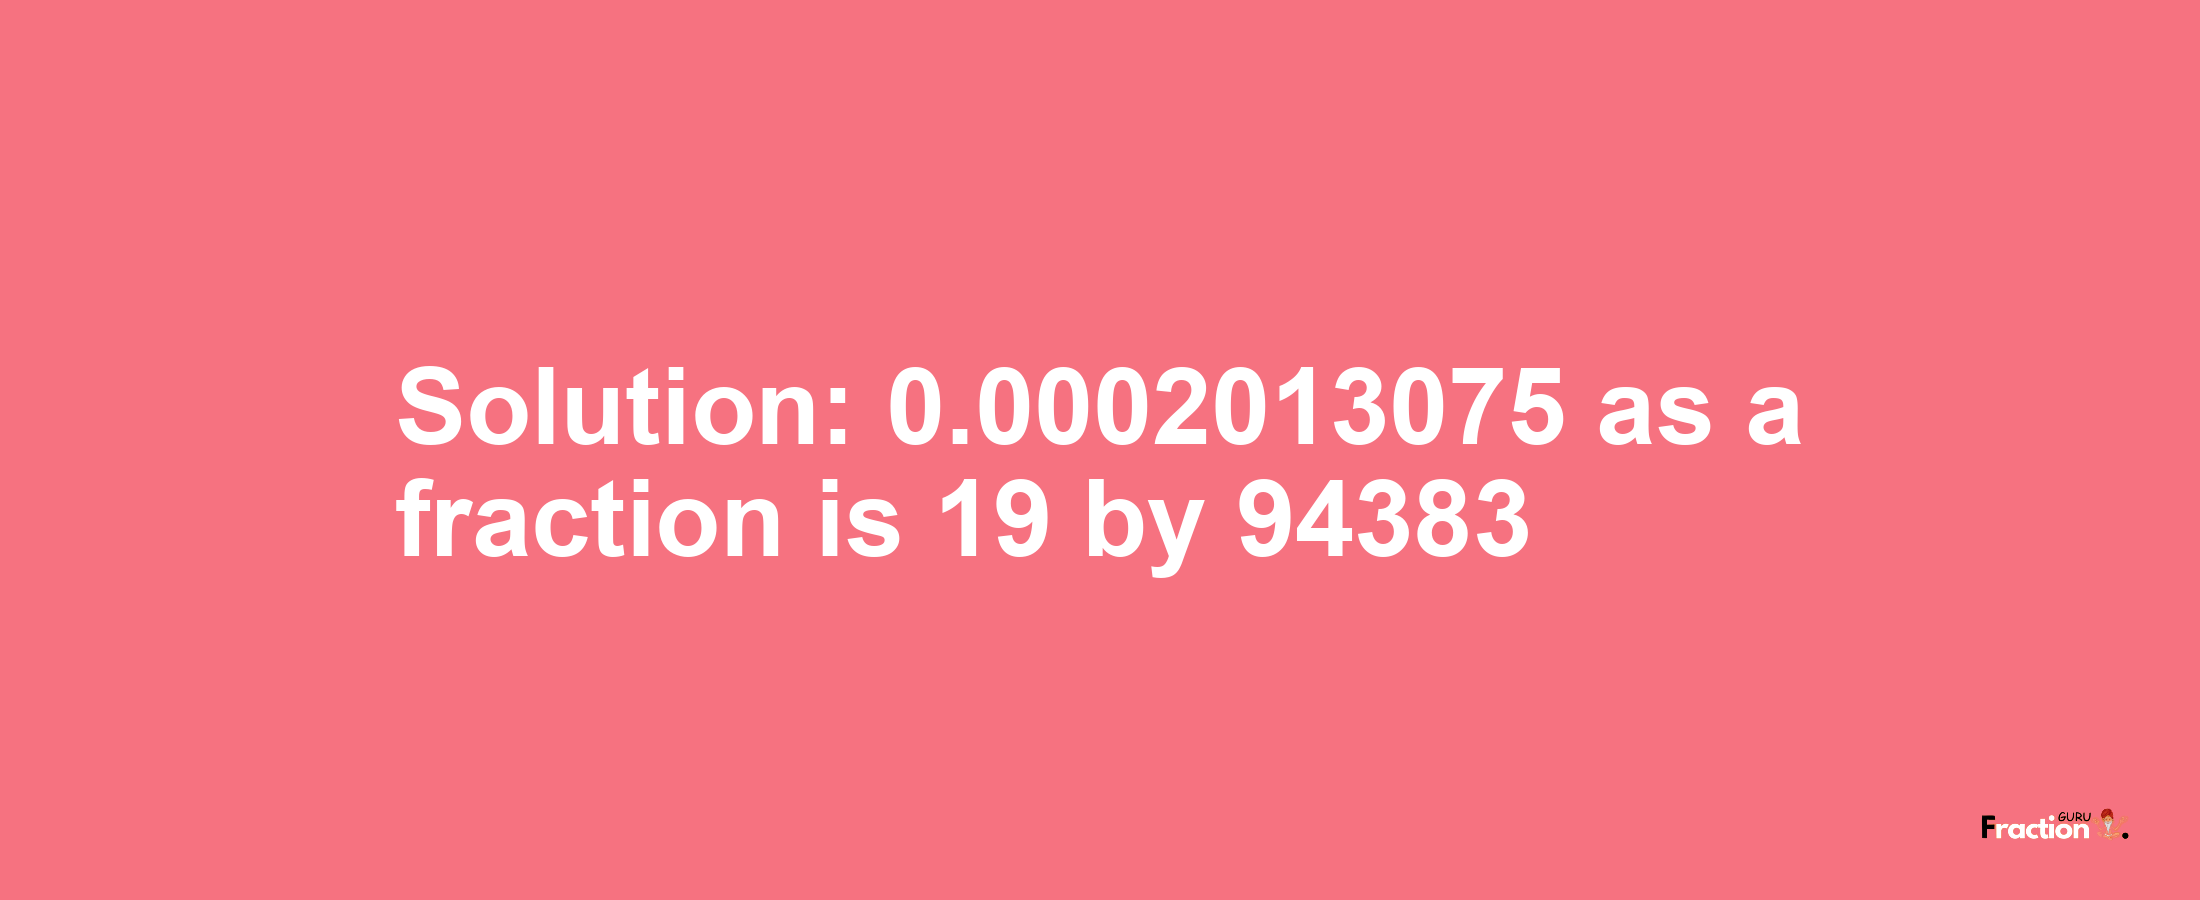 Solution:0.0002013075 as a fraction is 19/94383